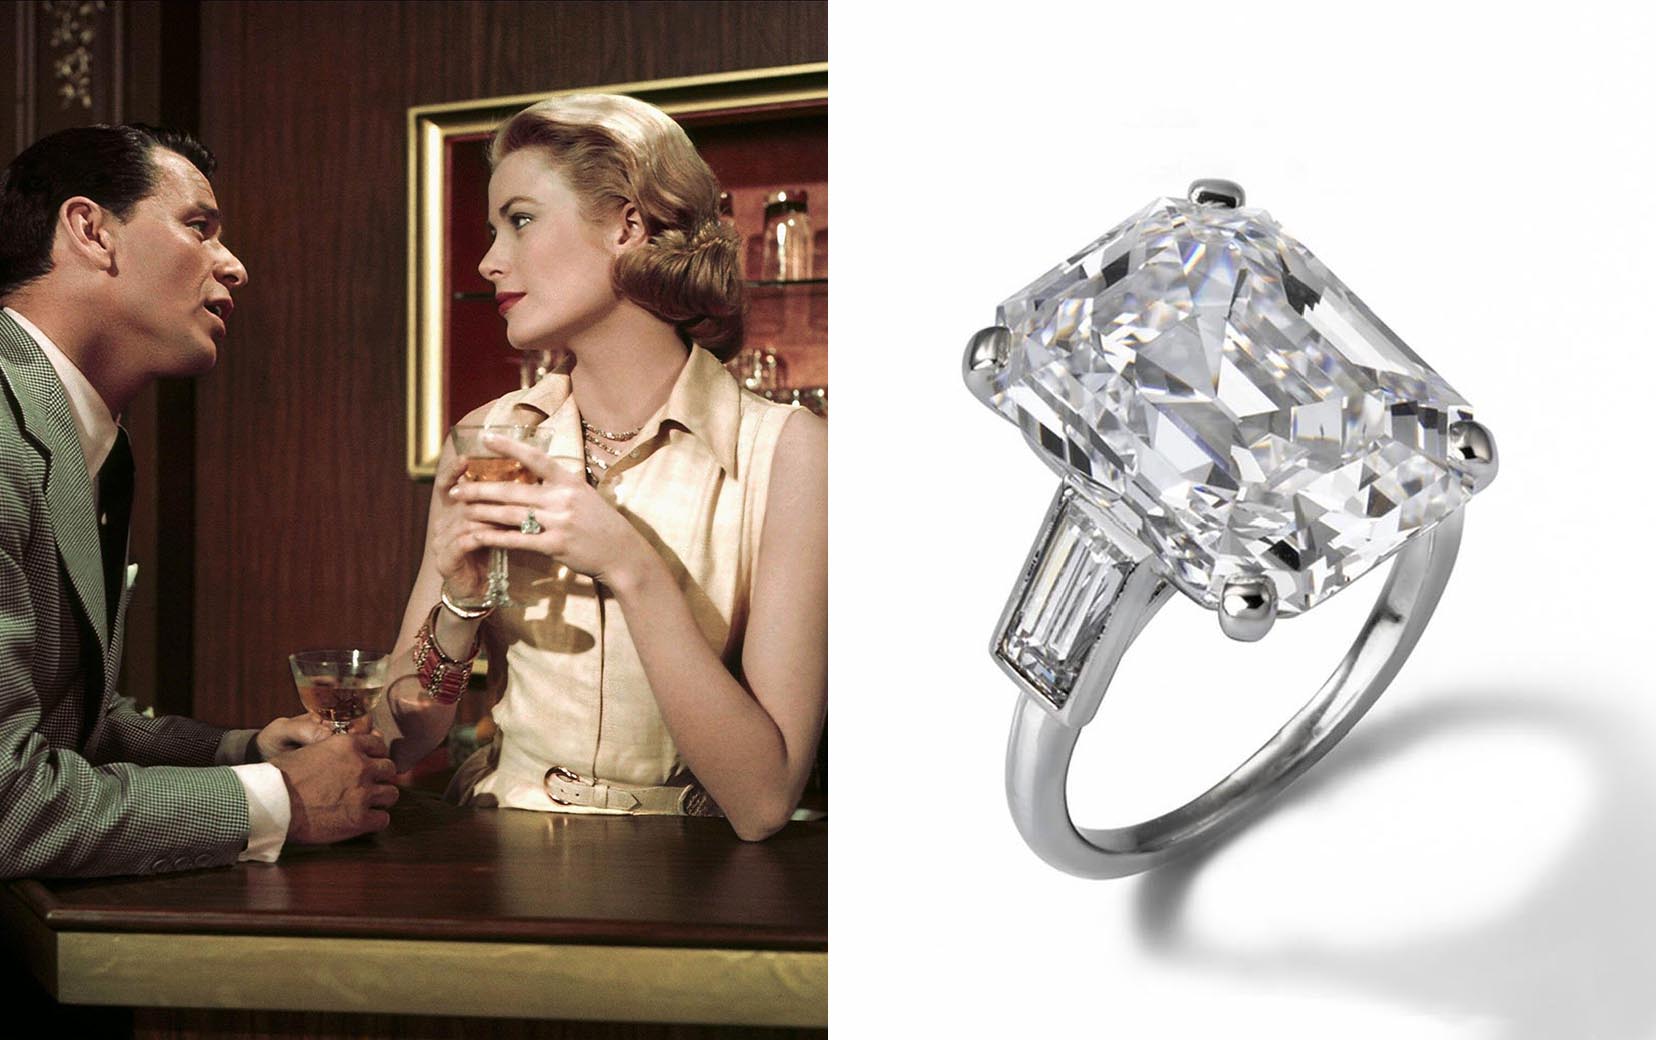 10.48-carat emerald cut diamond engagement ring with side stones and platinum band worn by Grace Kelly in High Society movie